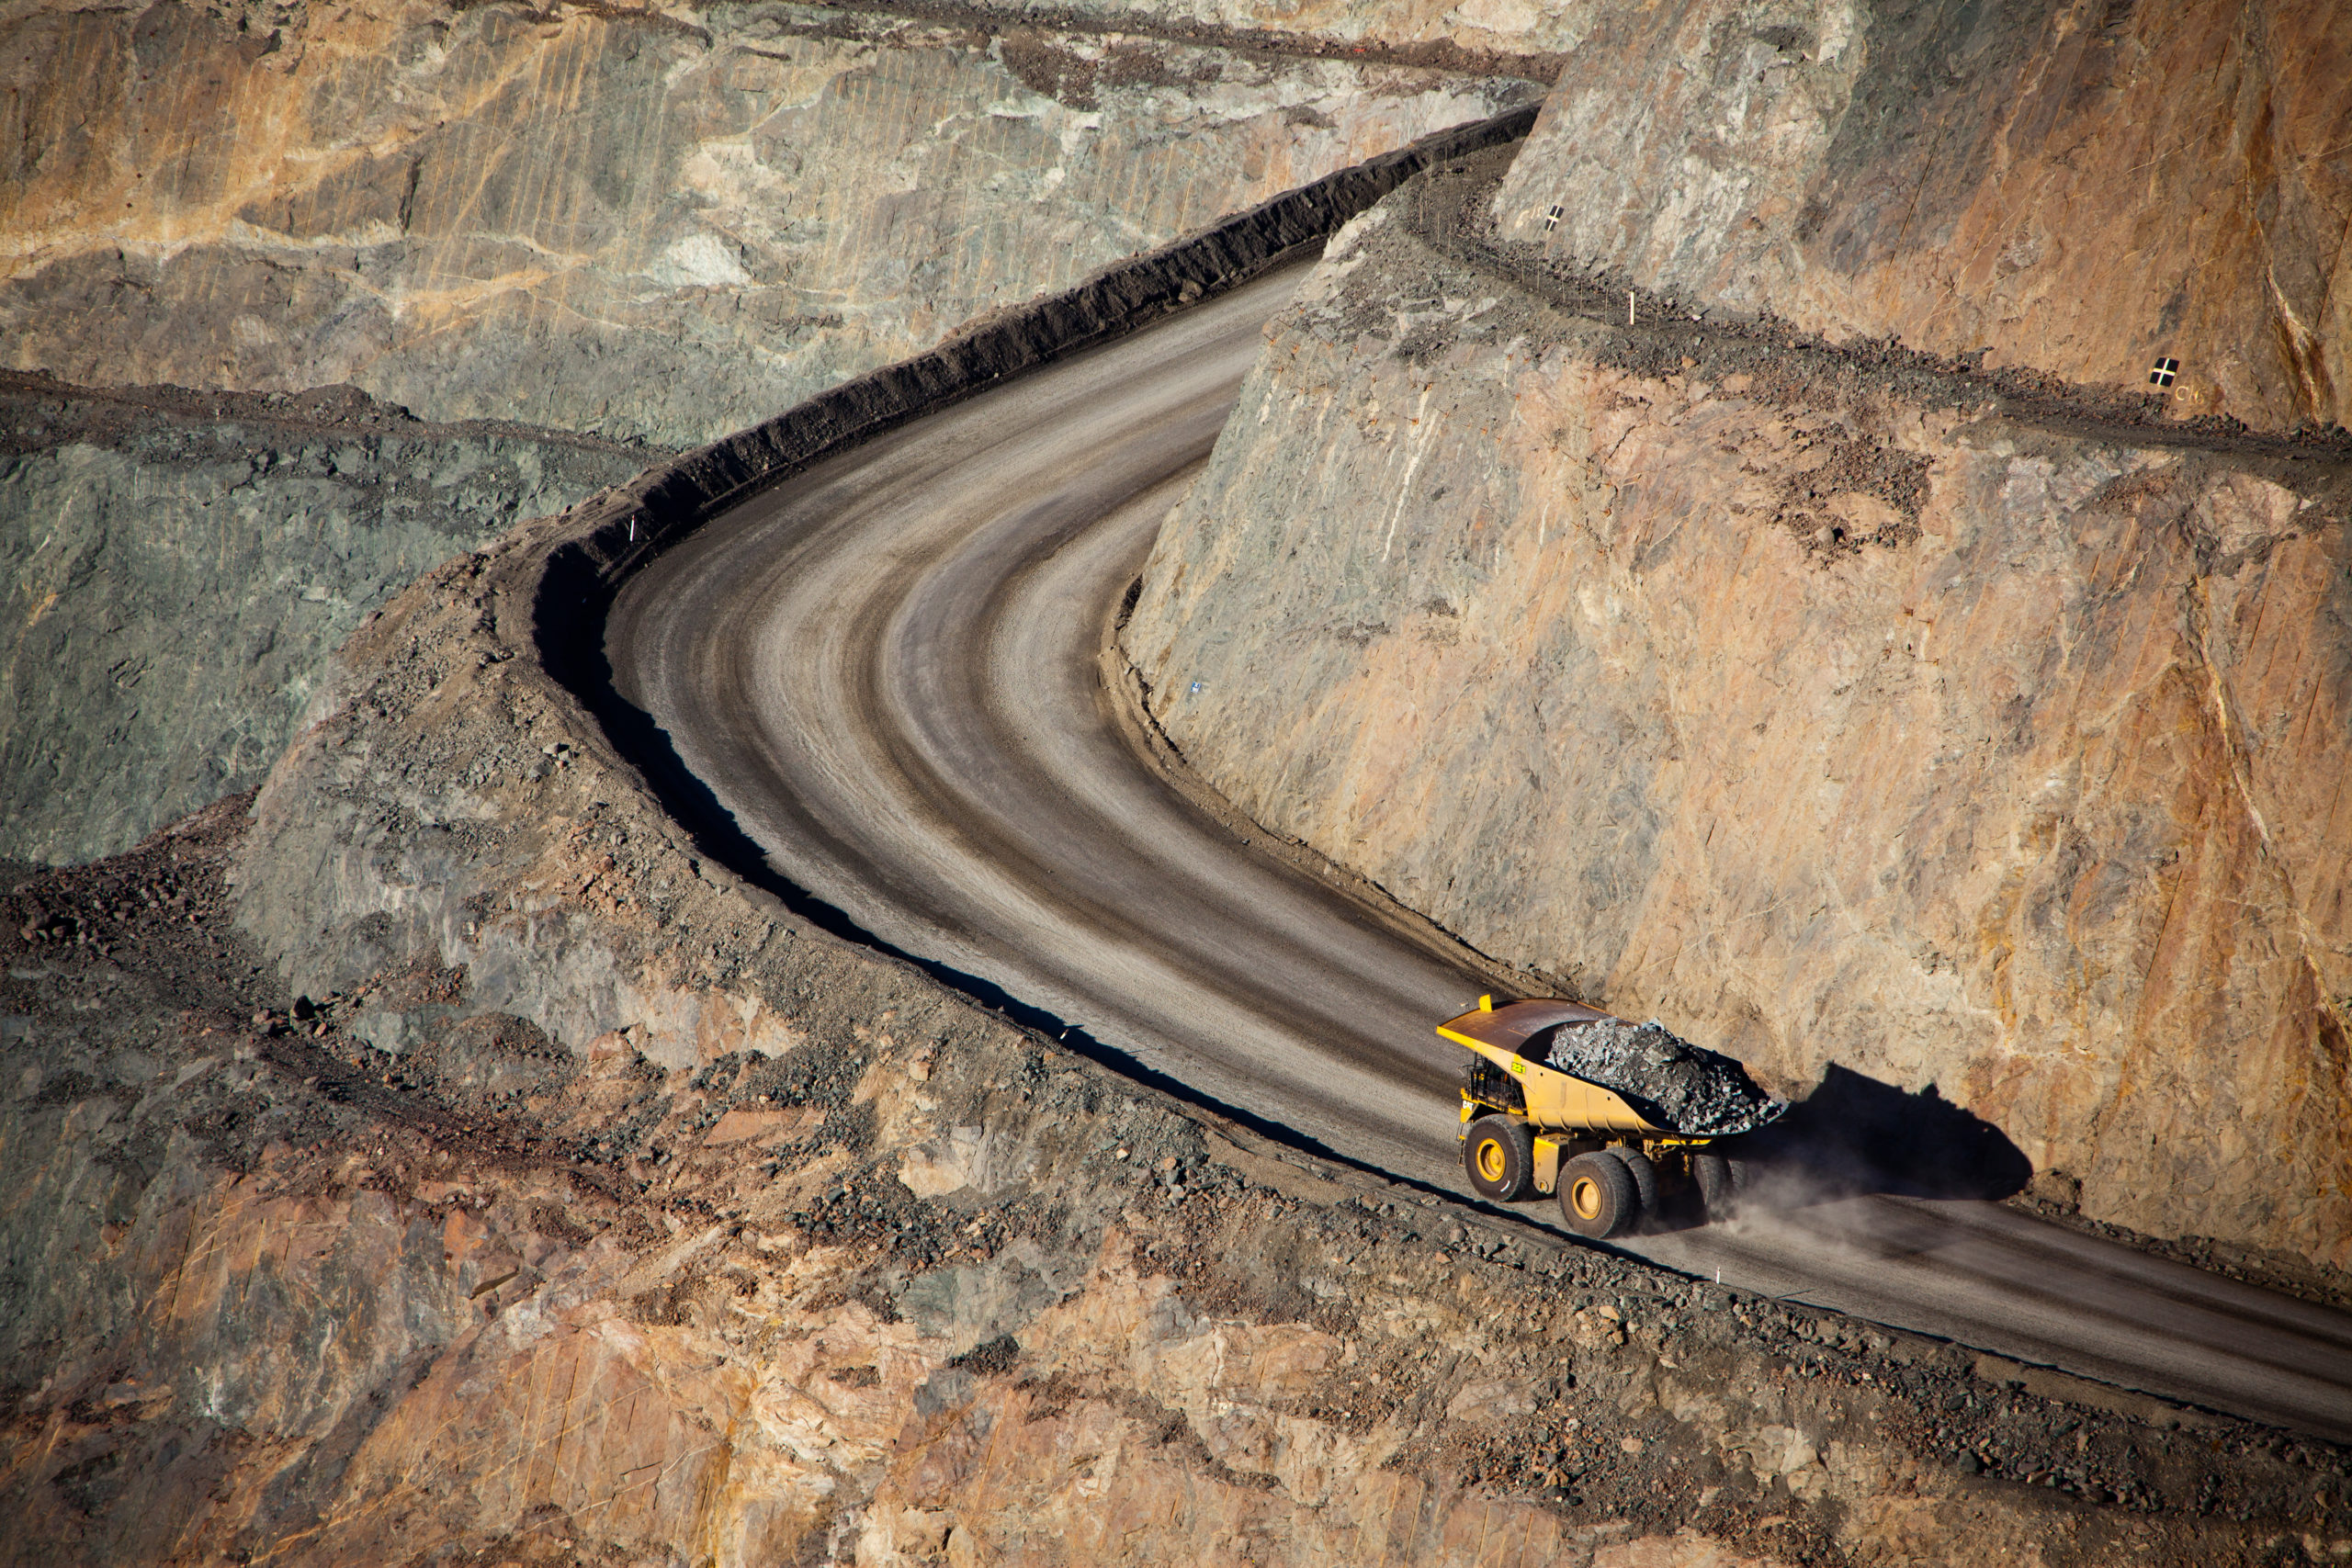 Australian Mining Lags, Expects Recovery